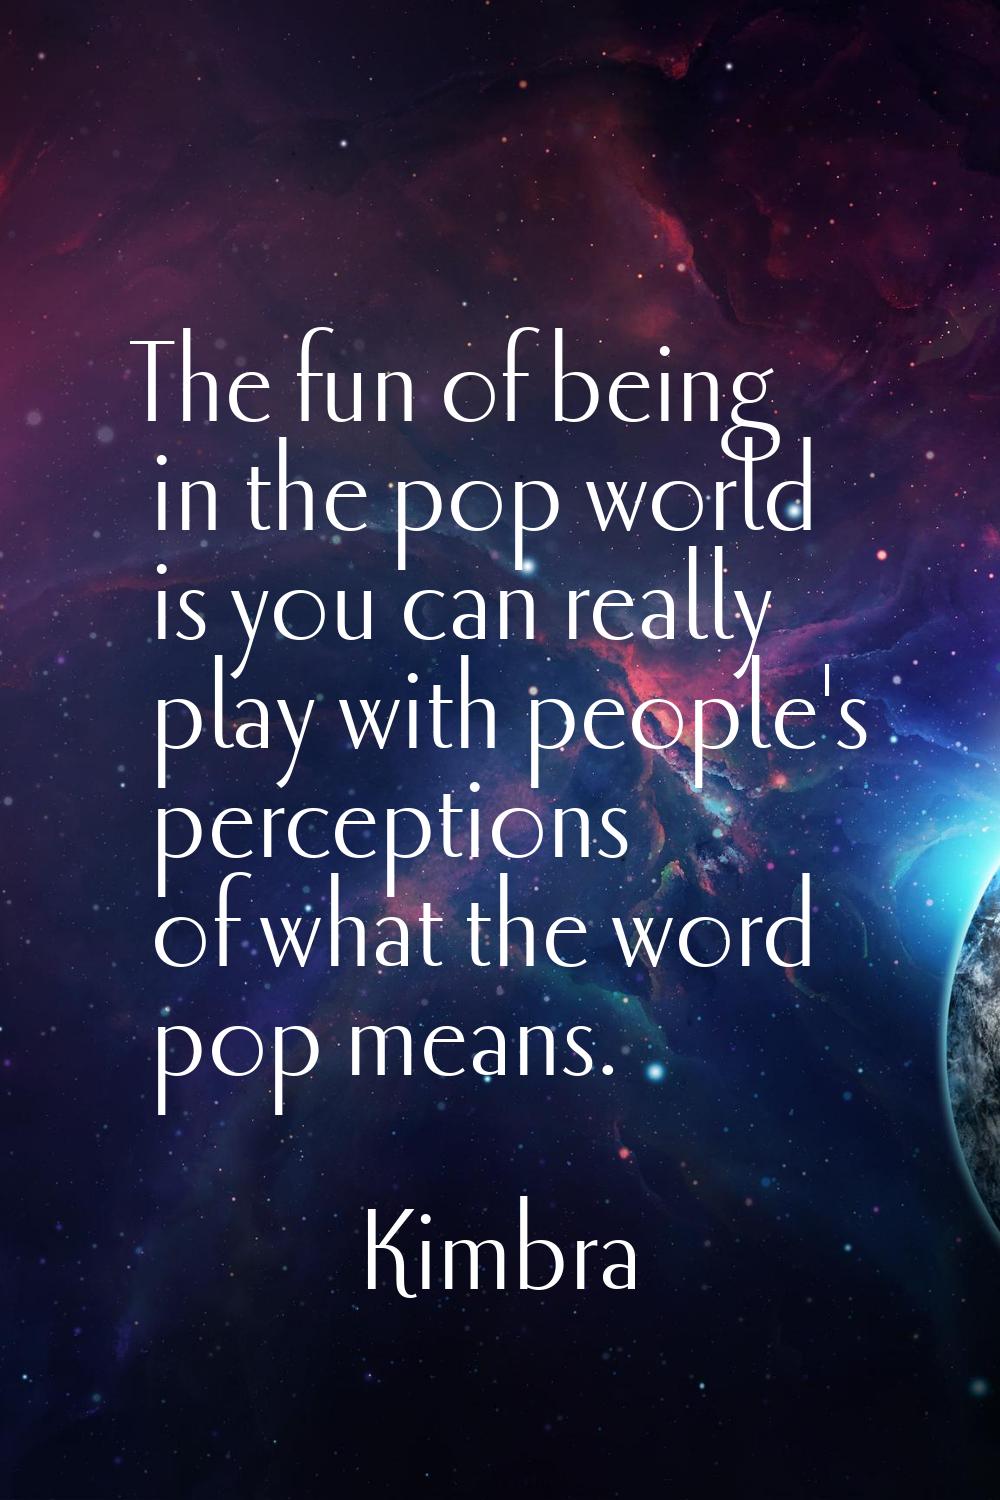 The fun of being in the pop world is you can really play with people's perceptions of what the word